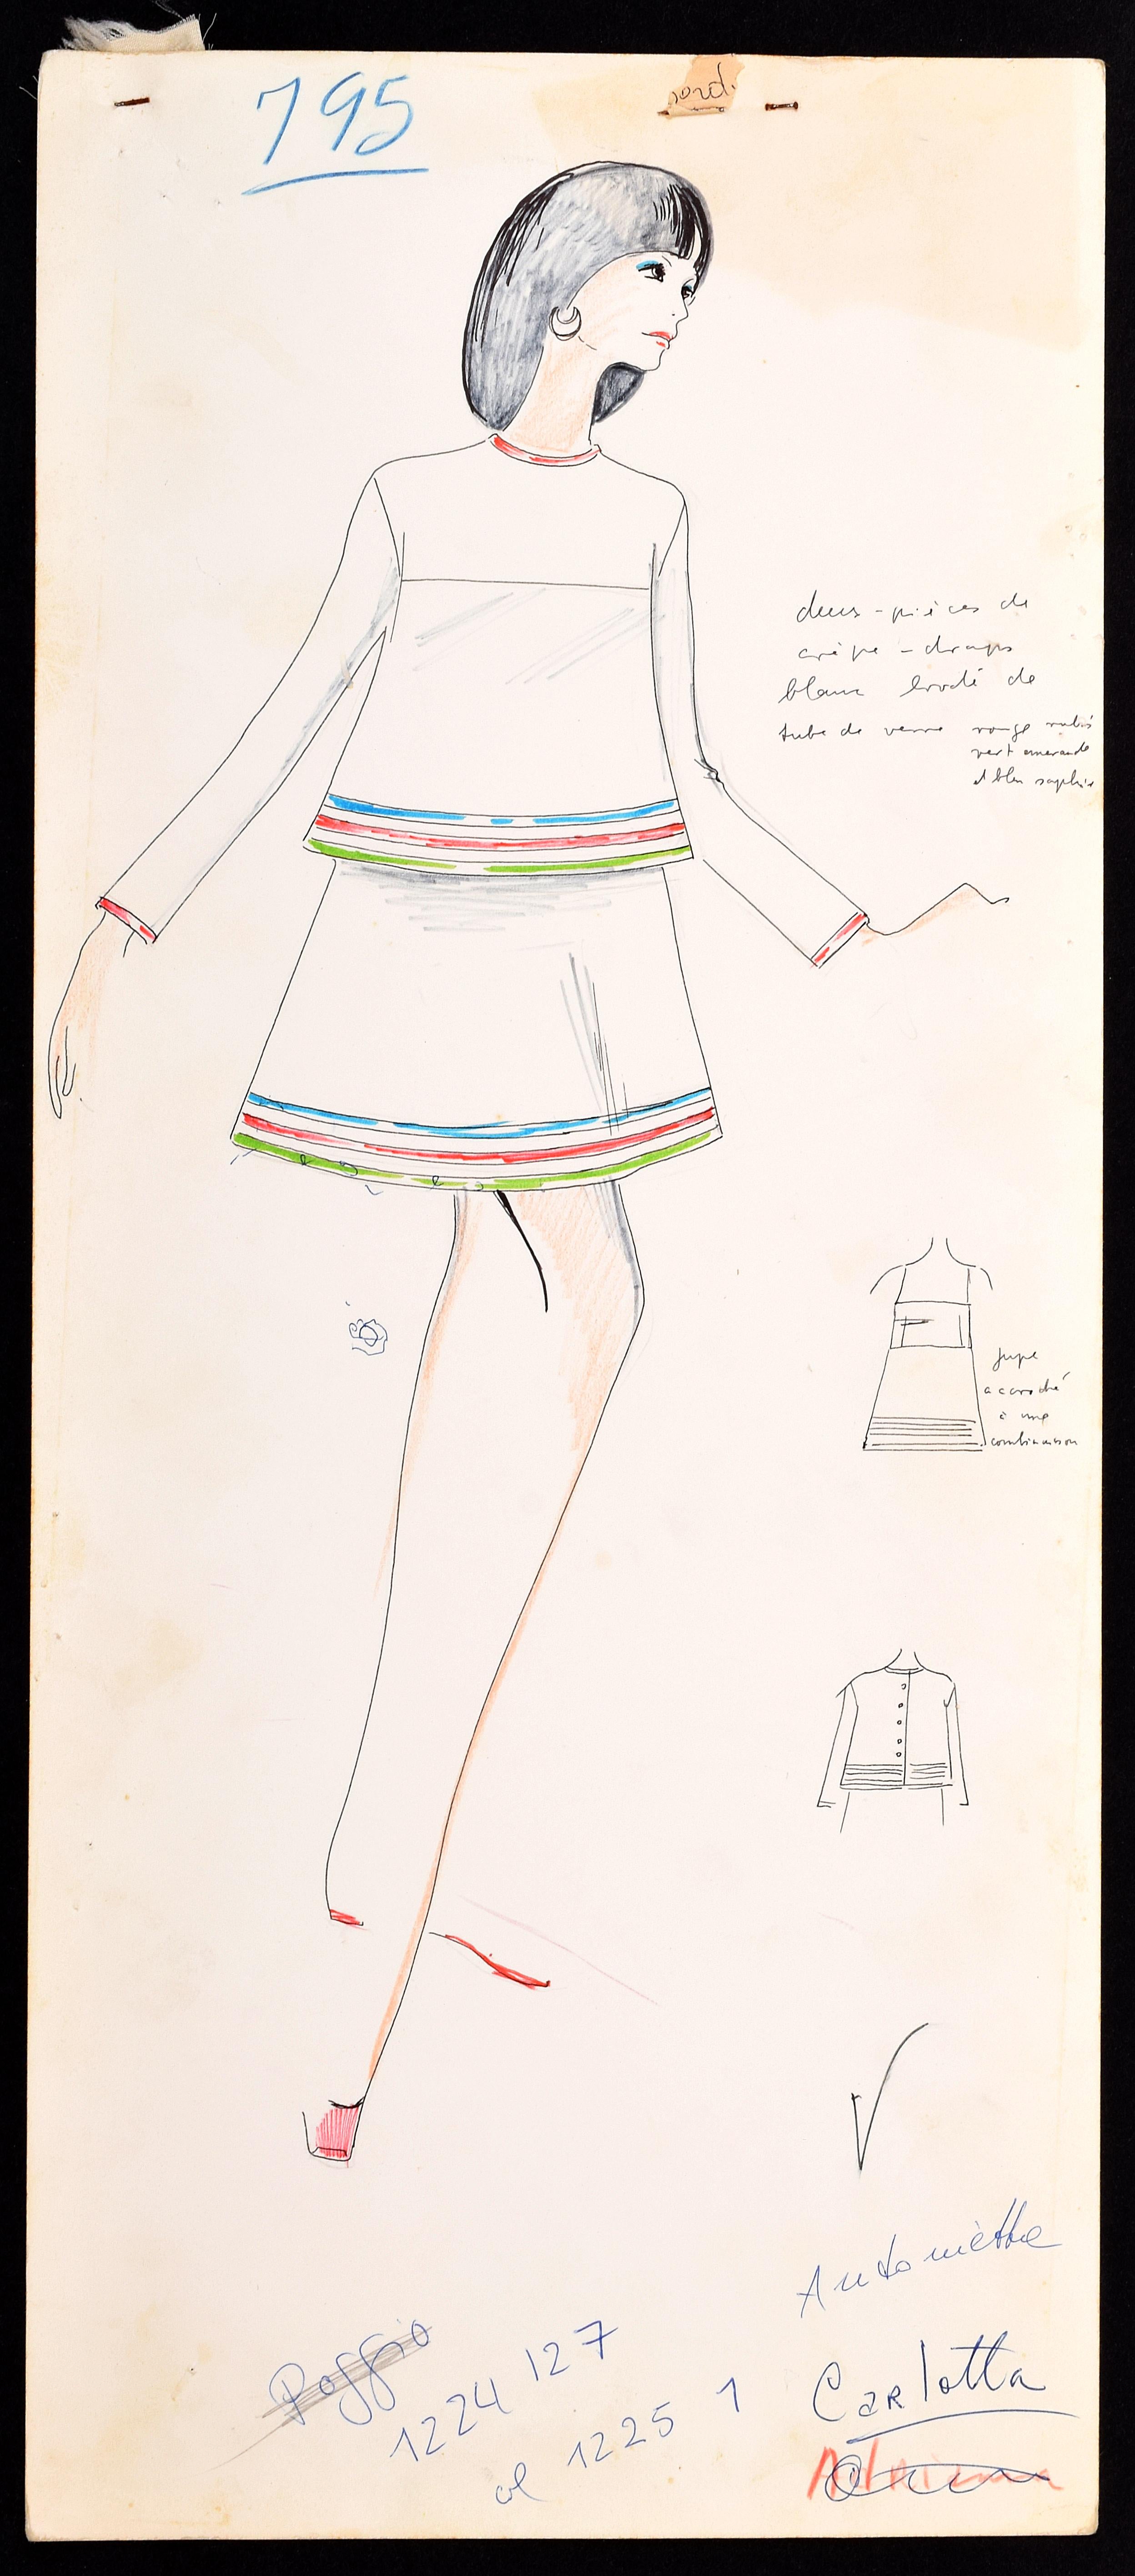 ARTIST: Karl Lagerfeld

MARKINGS: none

COUNTRY OF ORIGIN & MATERIALS: Italy; heavy paper stock

ADDITIONAL INFORMATION: Original fashion design sketches by Karl Lagerfeld, from storage box labeled 